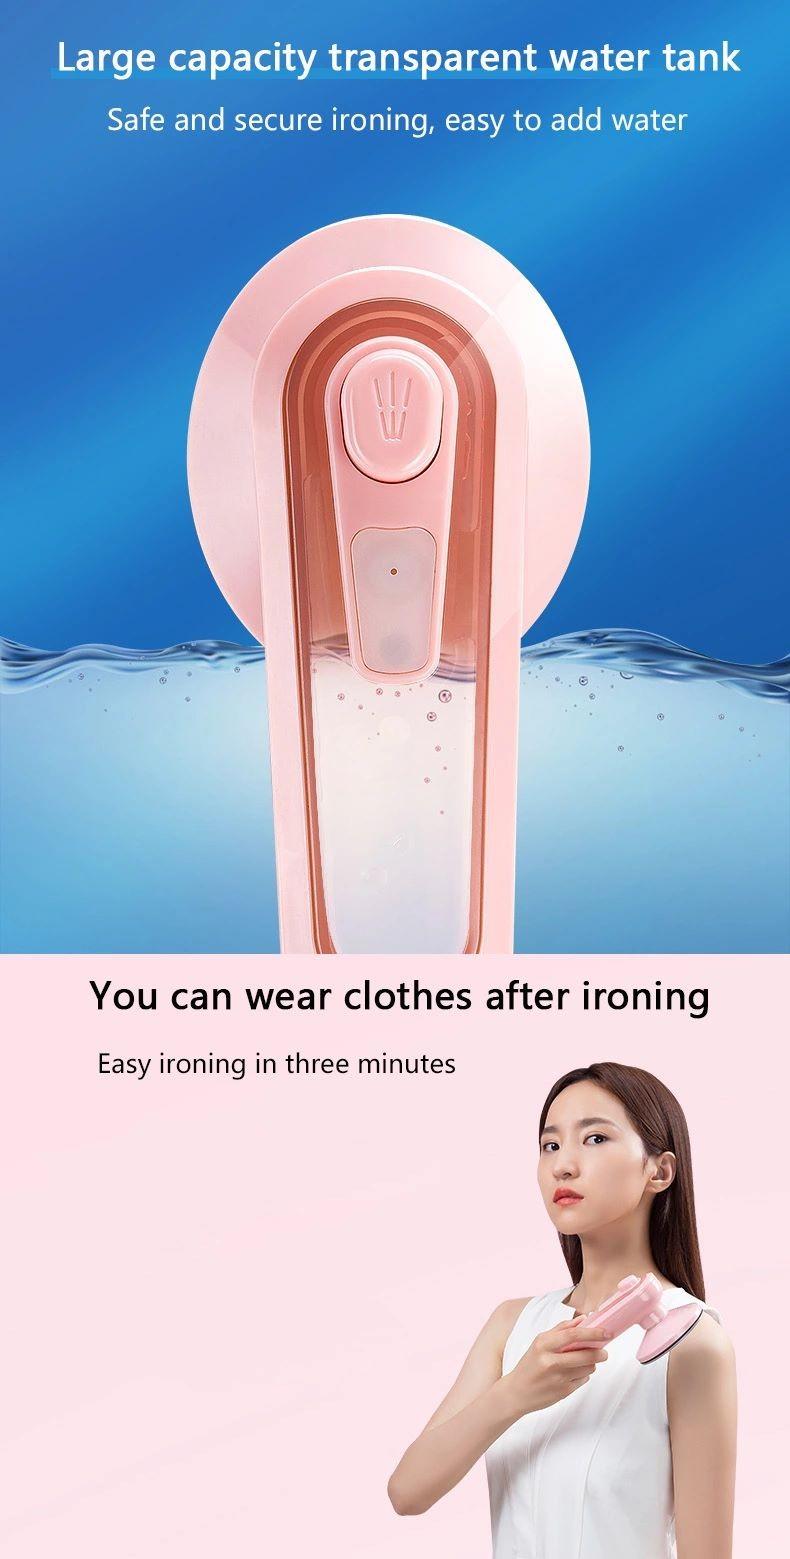 Home Steam Iron Garment Steamer Portable Electric Garment Cleaner Travel Mini Handheld Ironing Machine Steam Ironing Clothes